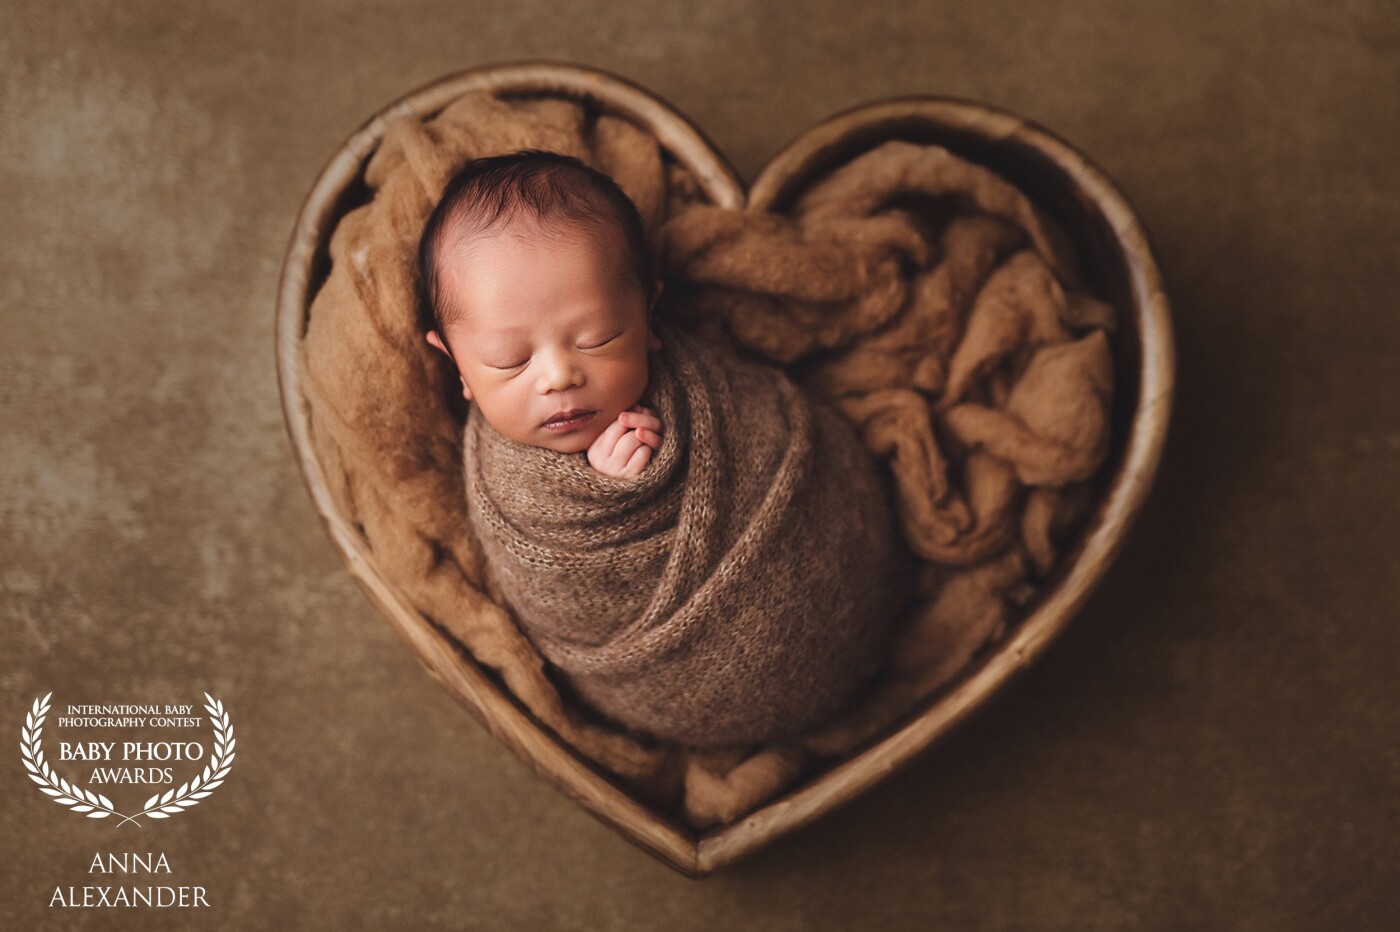 The cute baby boy was bundled up and so cozy. This simple but elegant heart prop speaks for itself and compliments the newborn portrait so nicely.